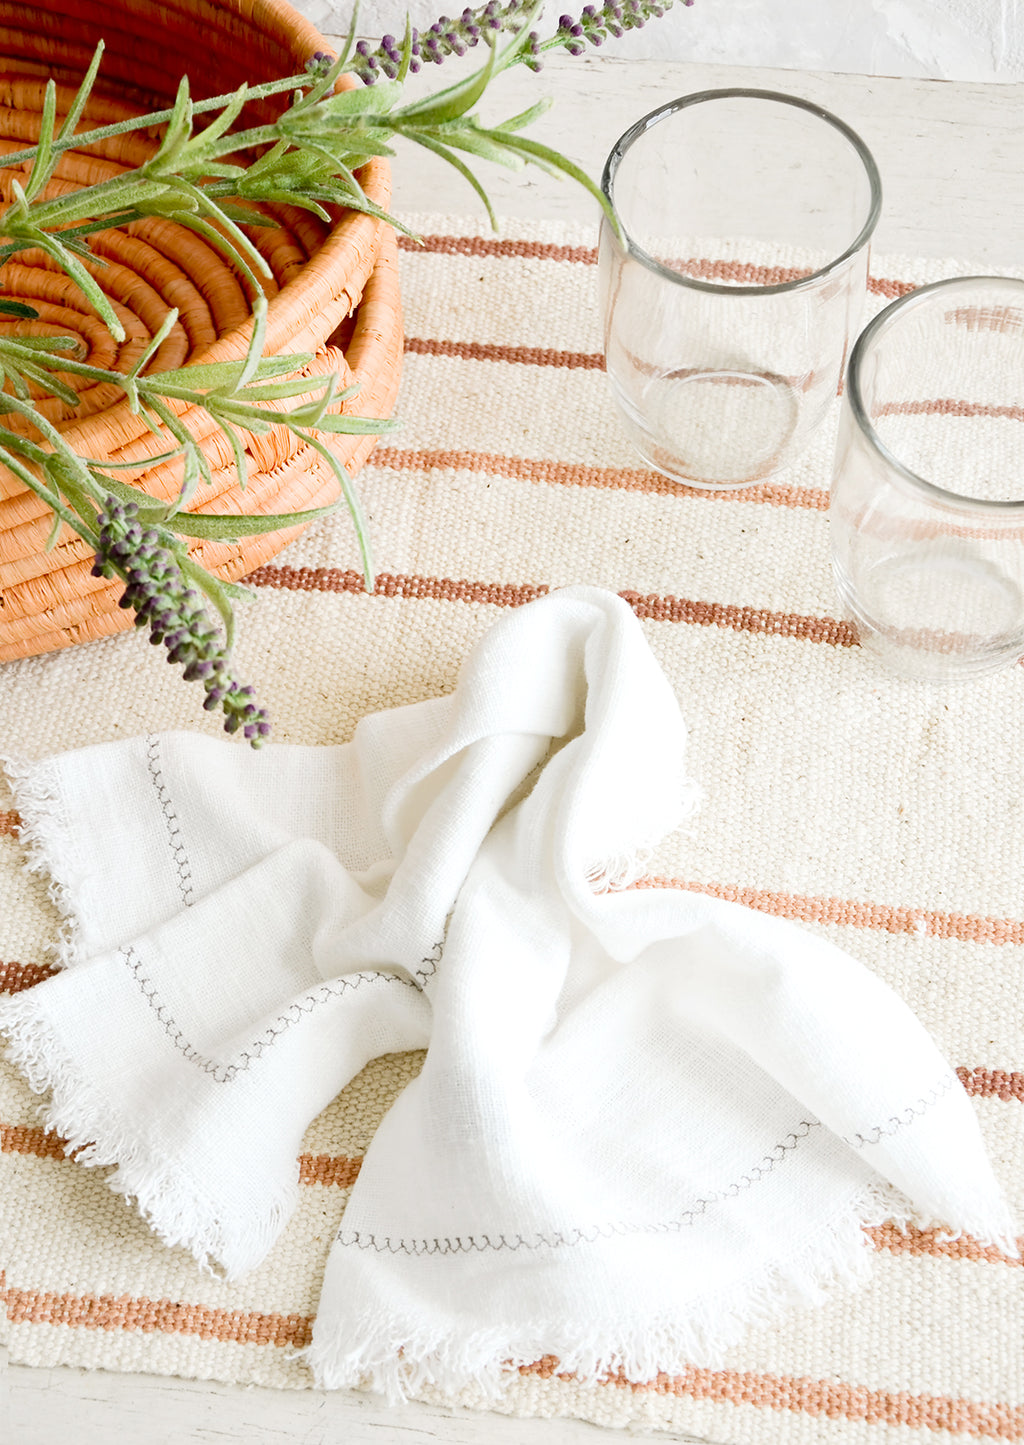 Natural / Blush / Terracotta: Serene table setting with neutral and white table linens and glass cups